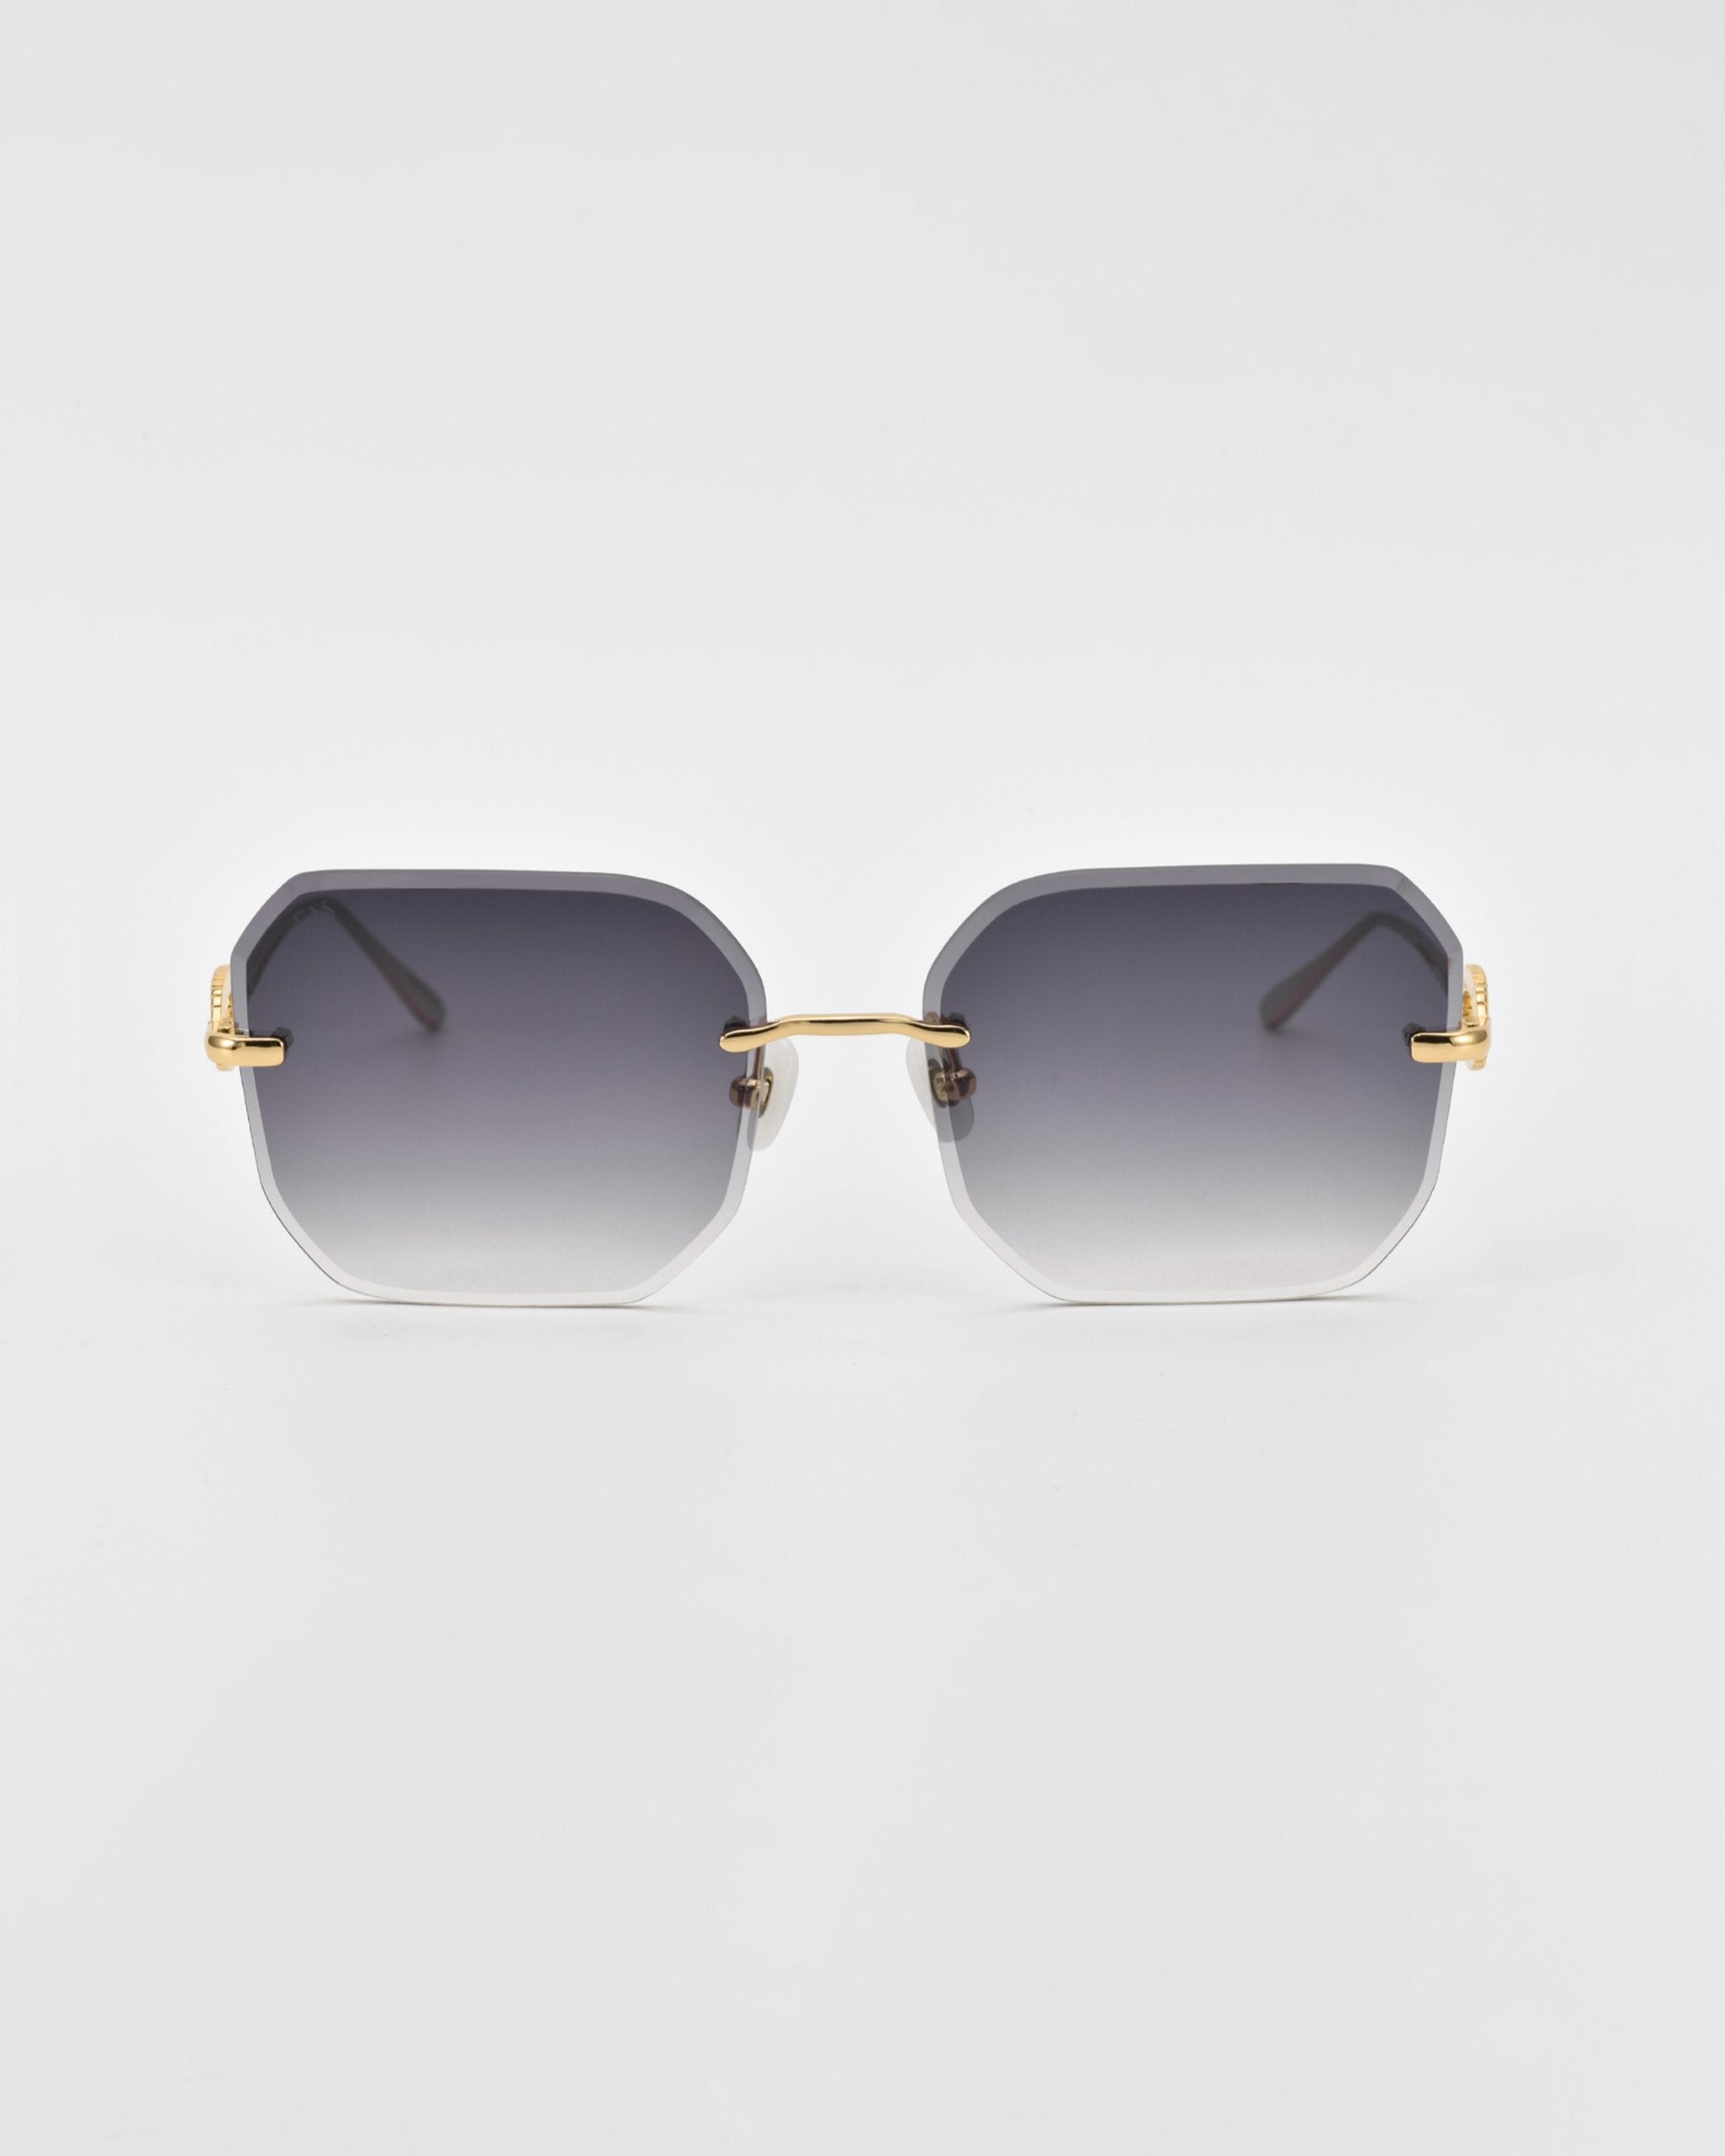 A pair of For Art's Sake® Aria sunglasses featuring gradient black to clear rectangular frames with gold accents on the hinges and arms is displayed against a white background. The design includes jade-stone nose pads, blending sleek modernity with a stylish and luxurious appearance.